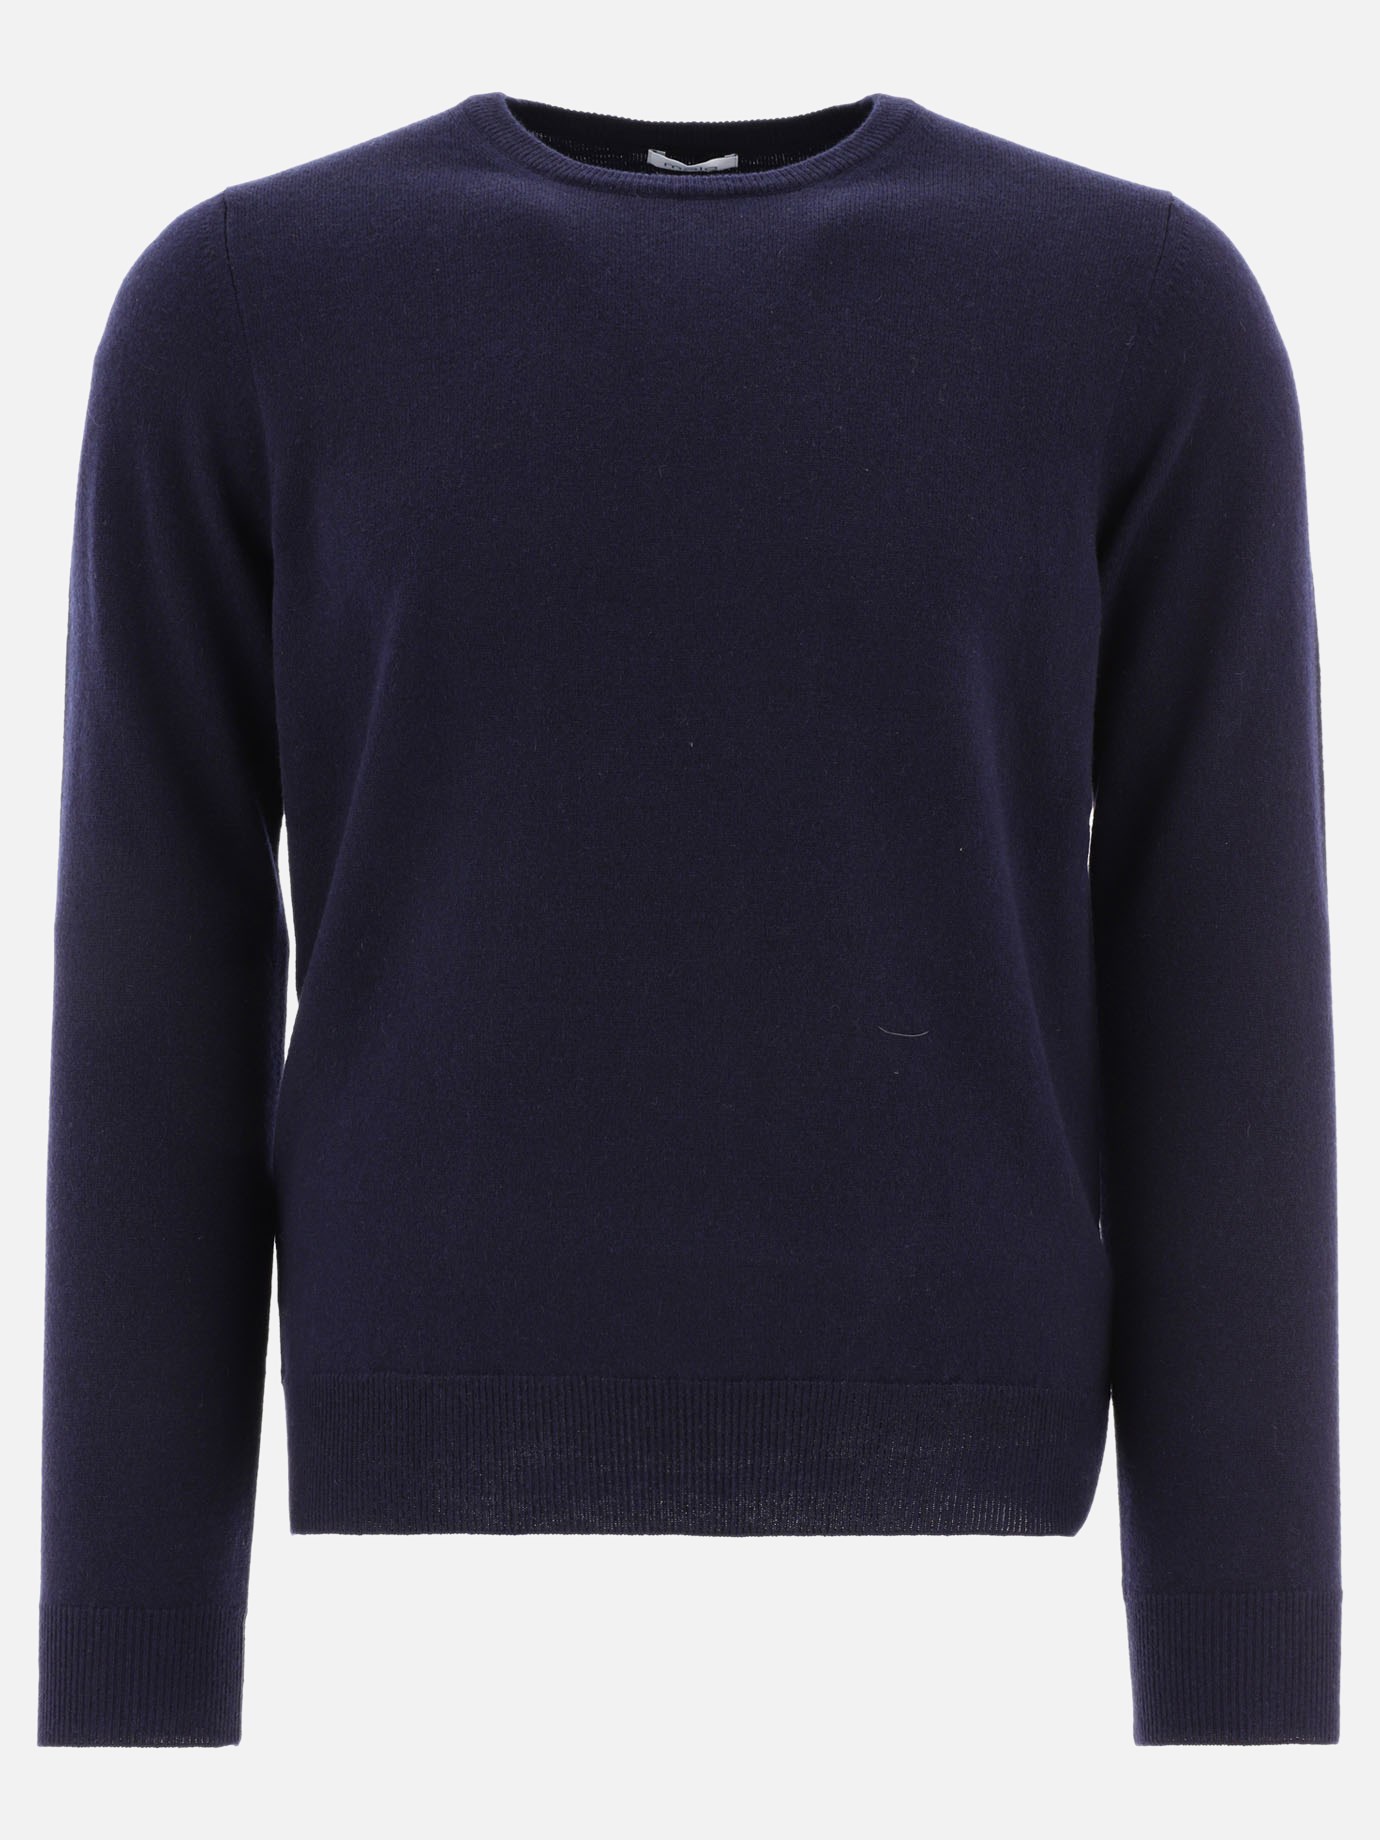 Sweater featuring ribbed hem and cuffsby Malo - 4